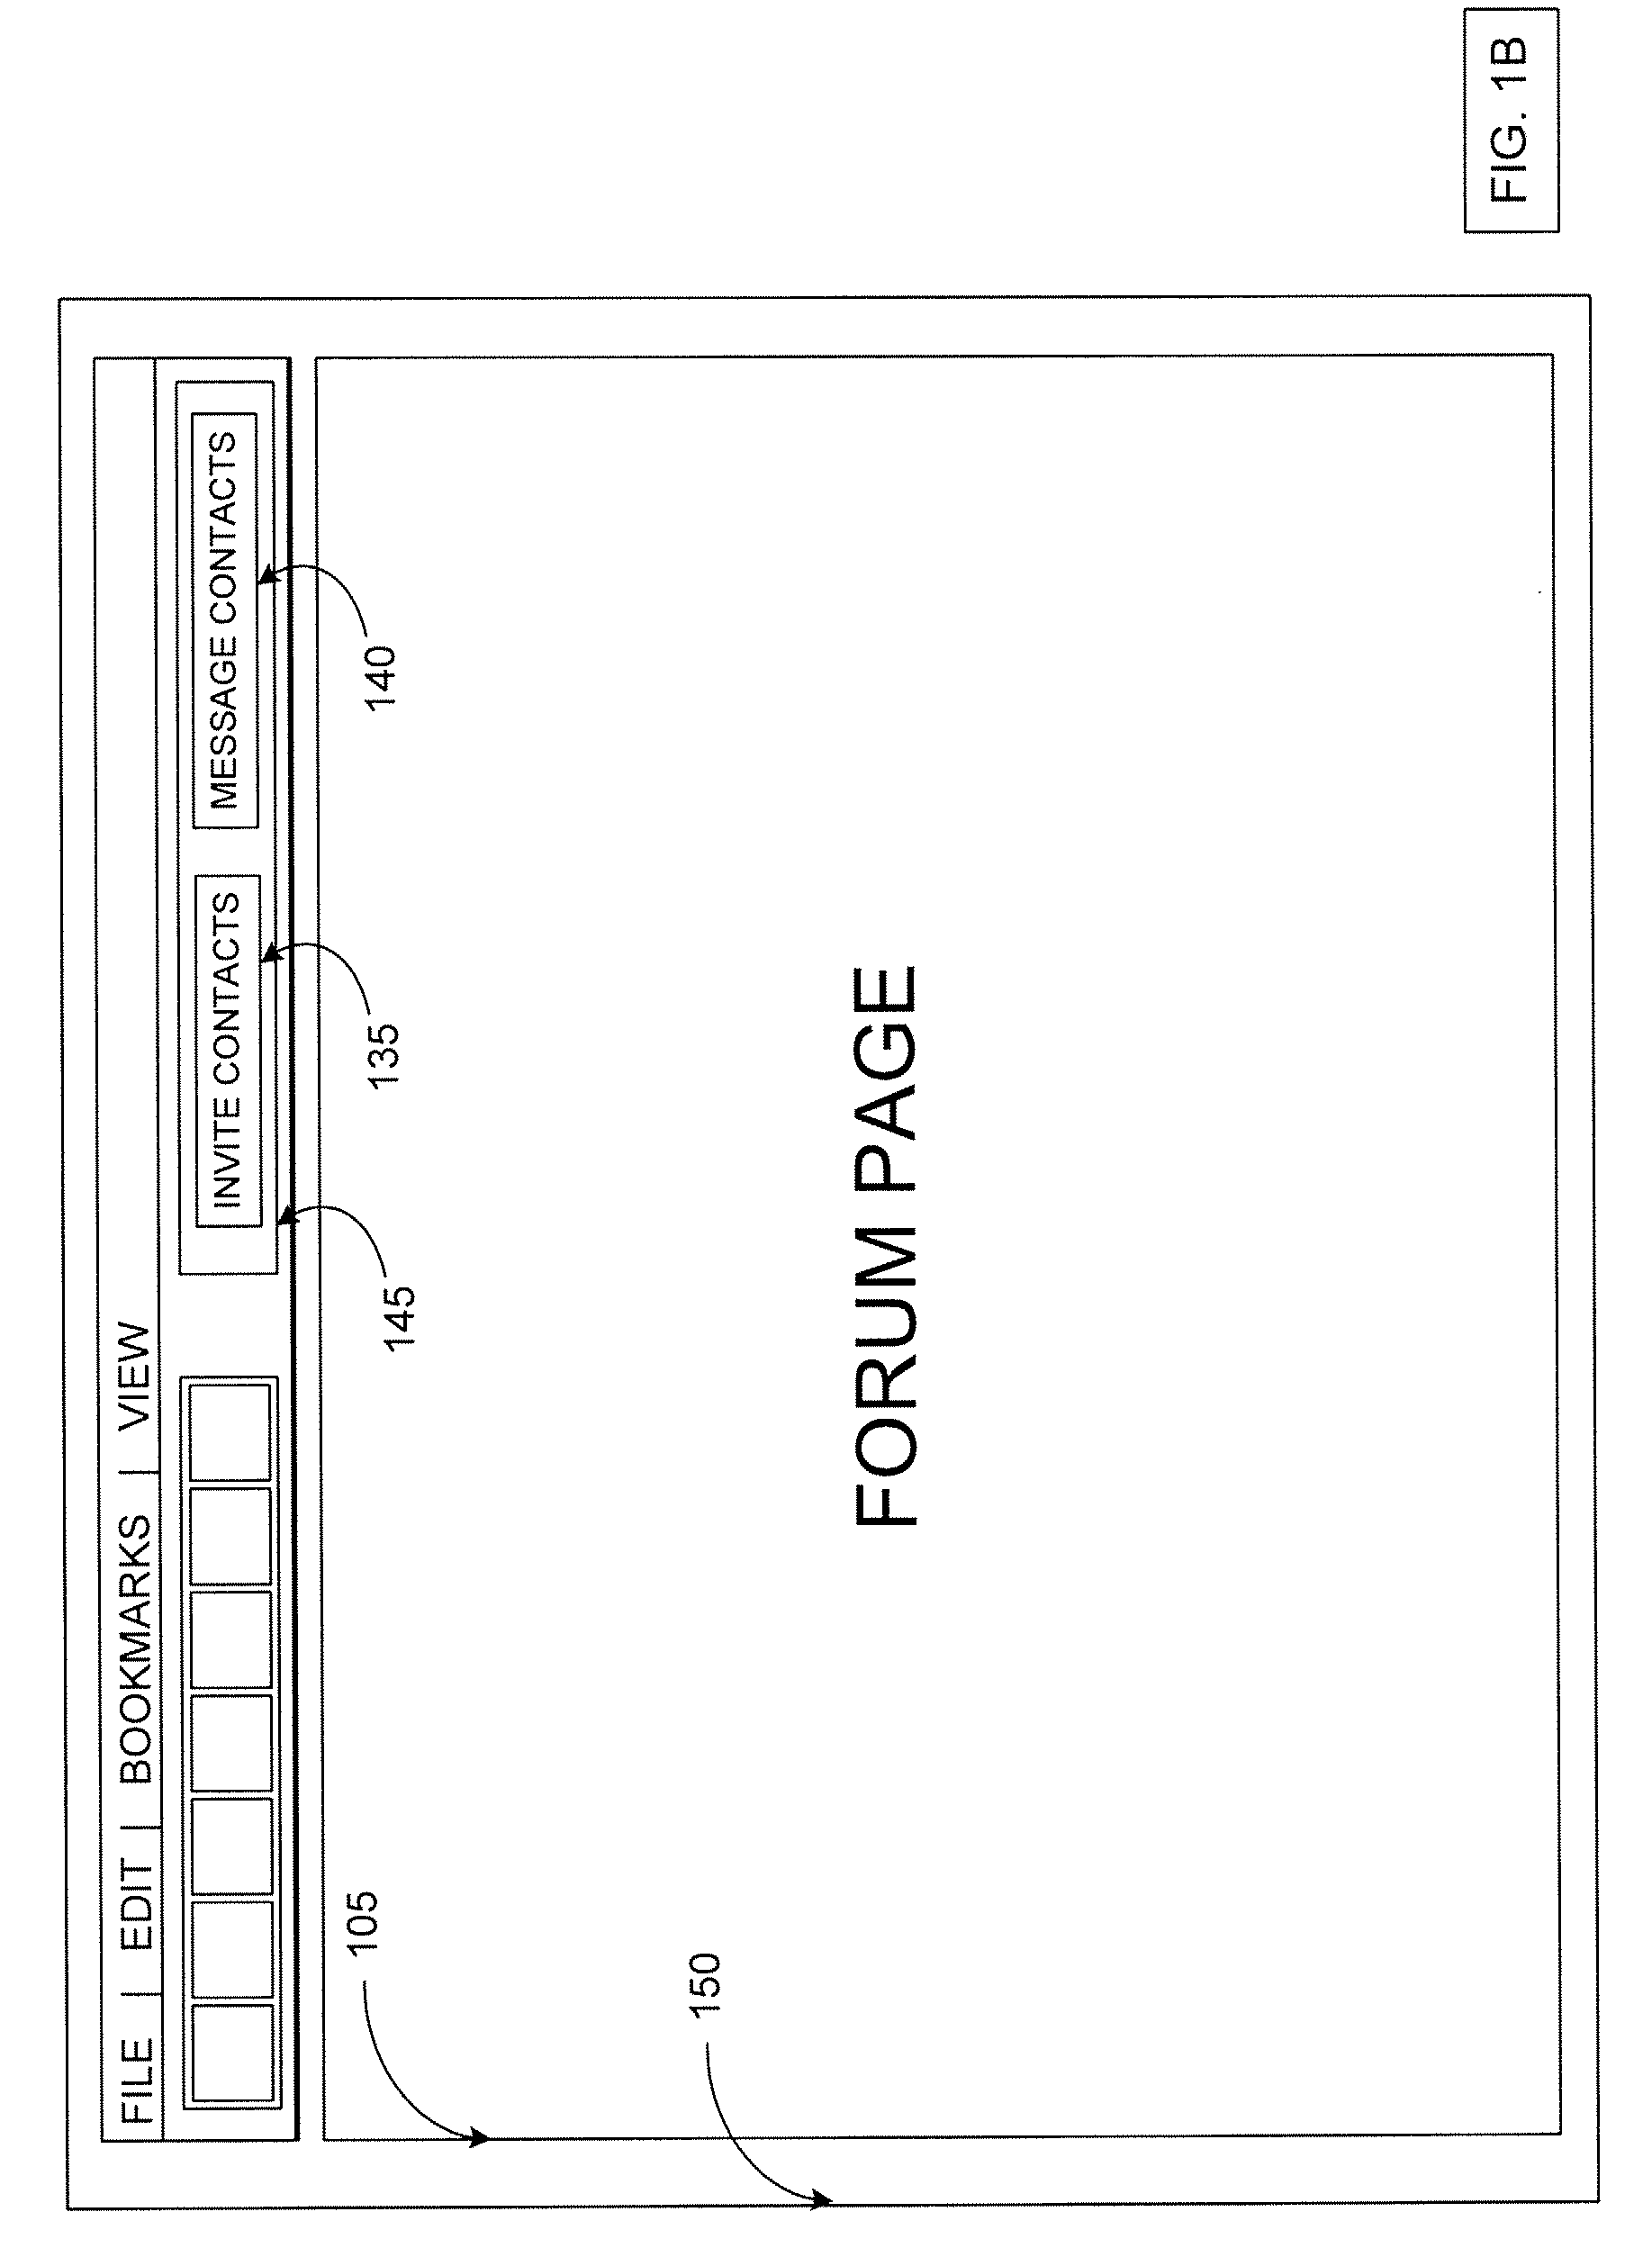 Methods and systems to use an aggregated contact list for sharing online information